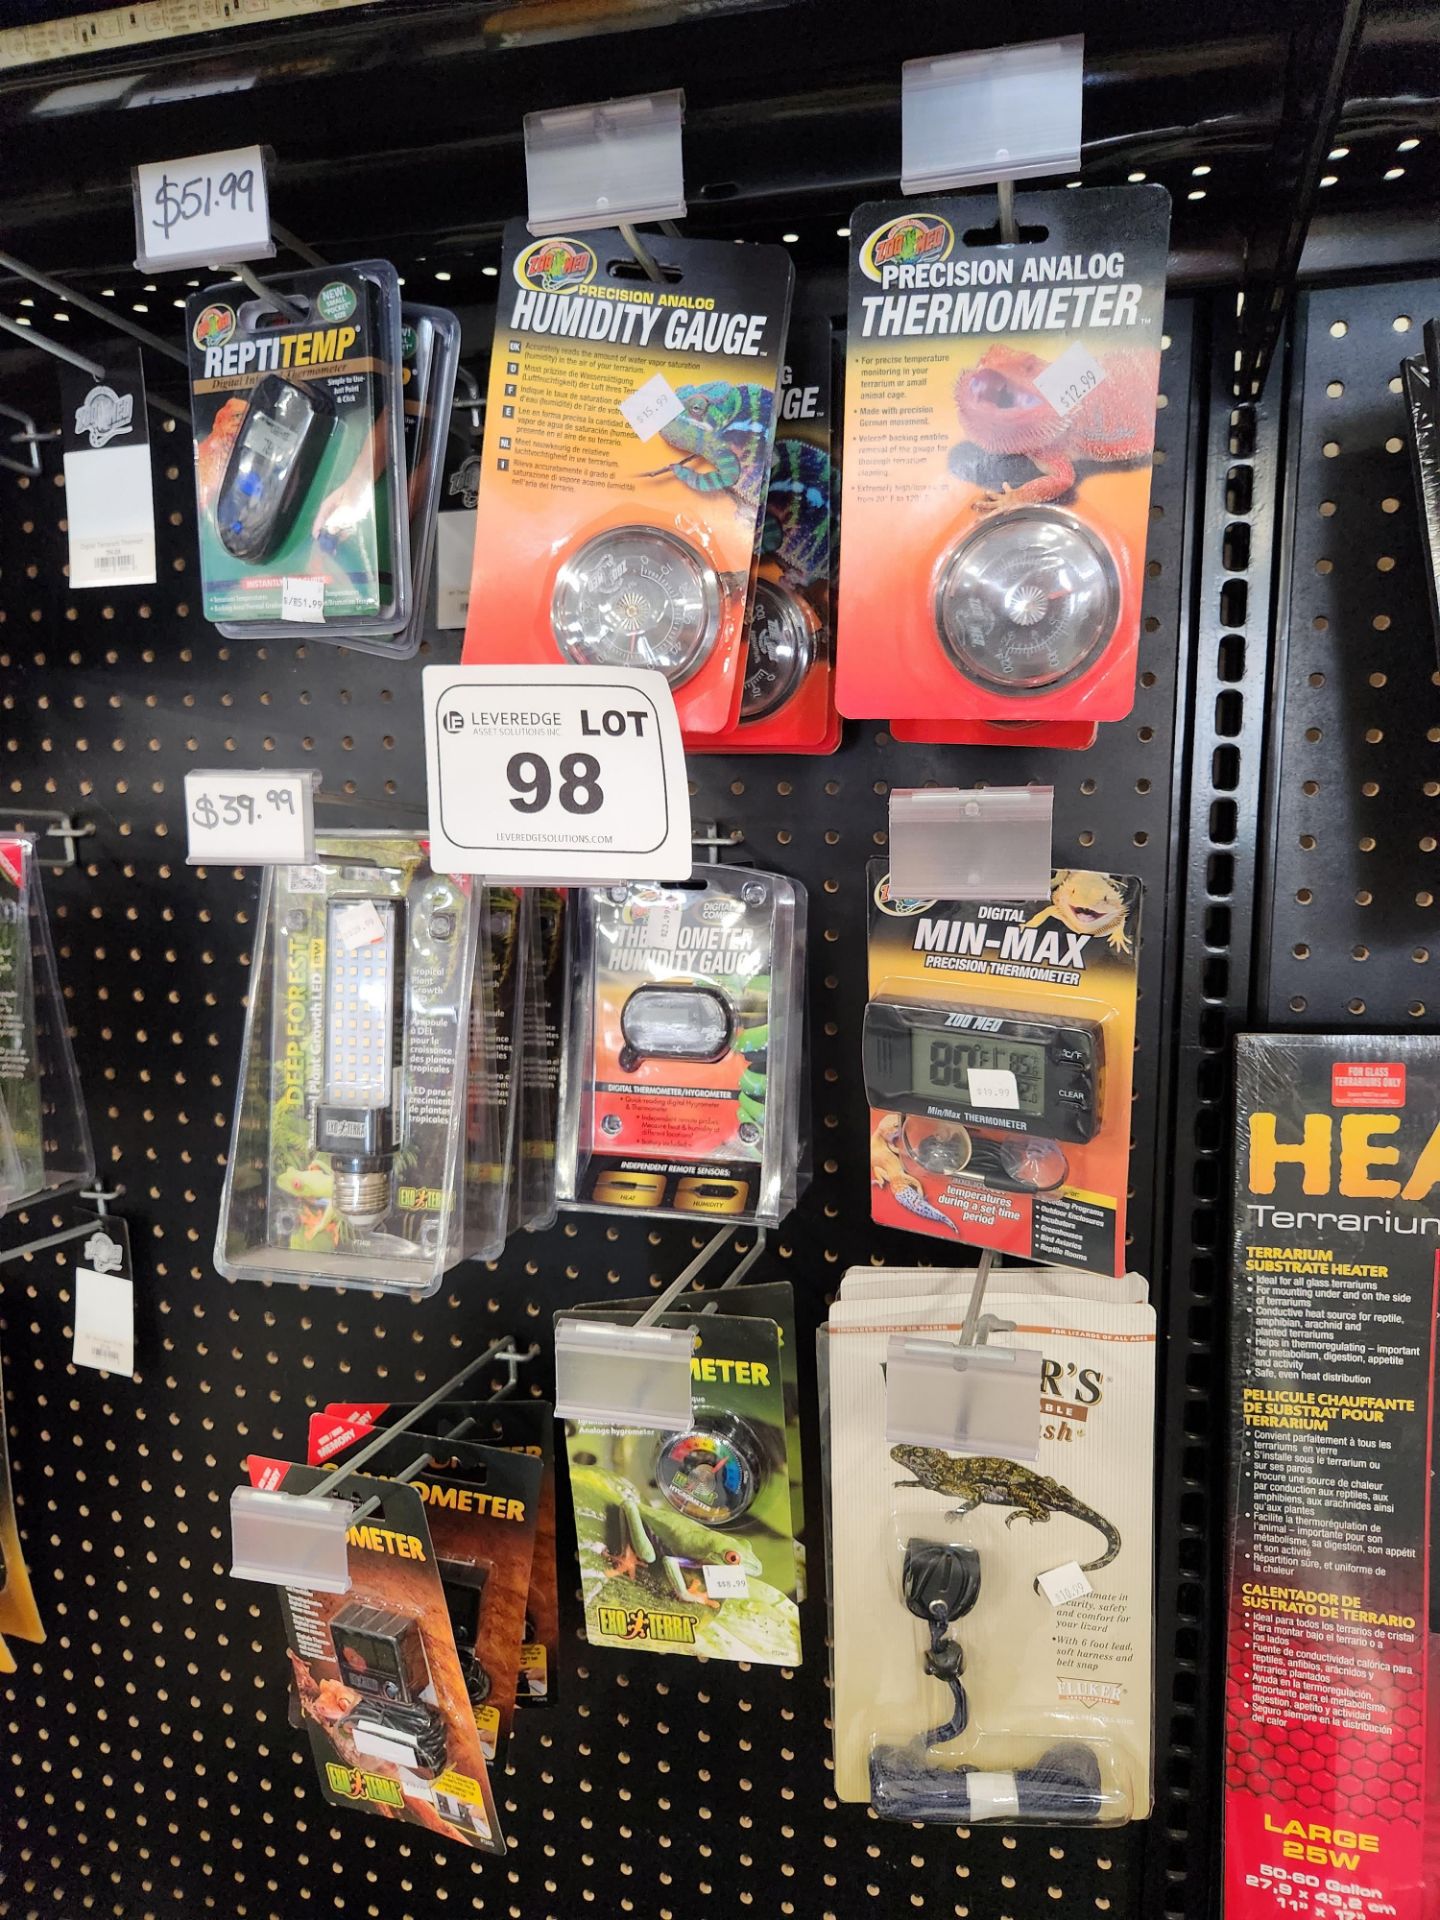 Lot of Humidity Gauges, Combometers, Infrared Thermometers, Plant Growth LED, Repta-Leash,